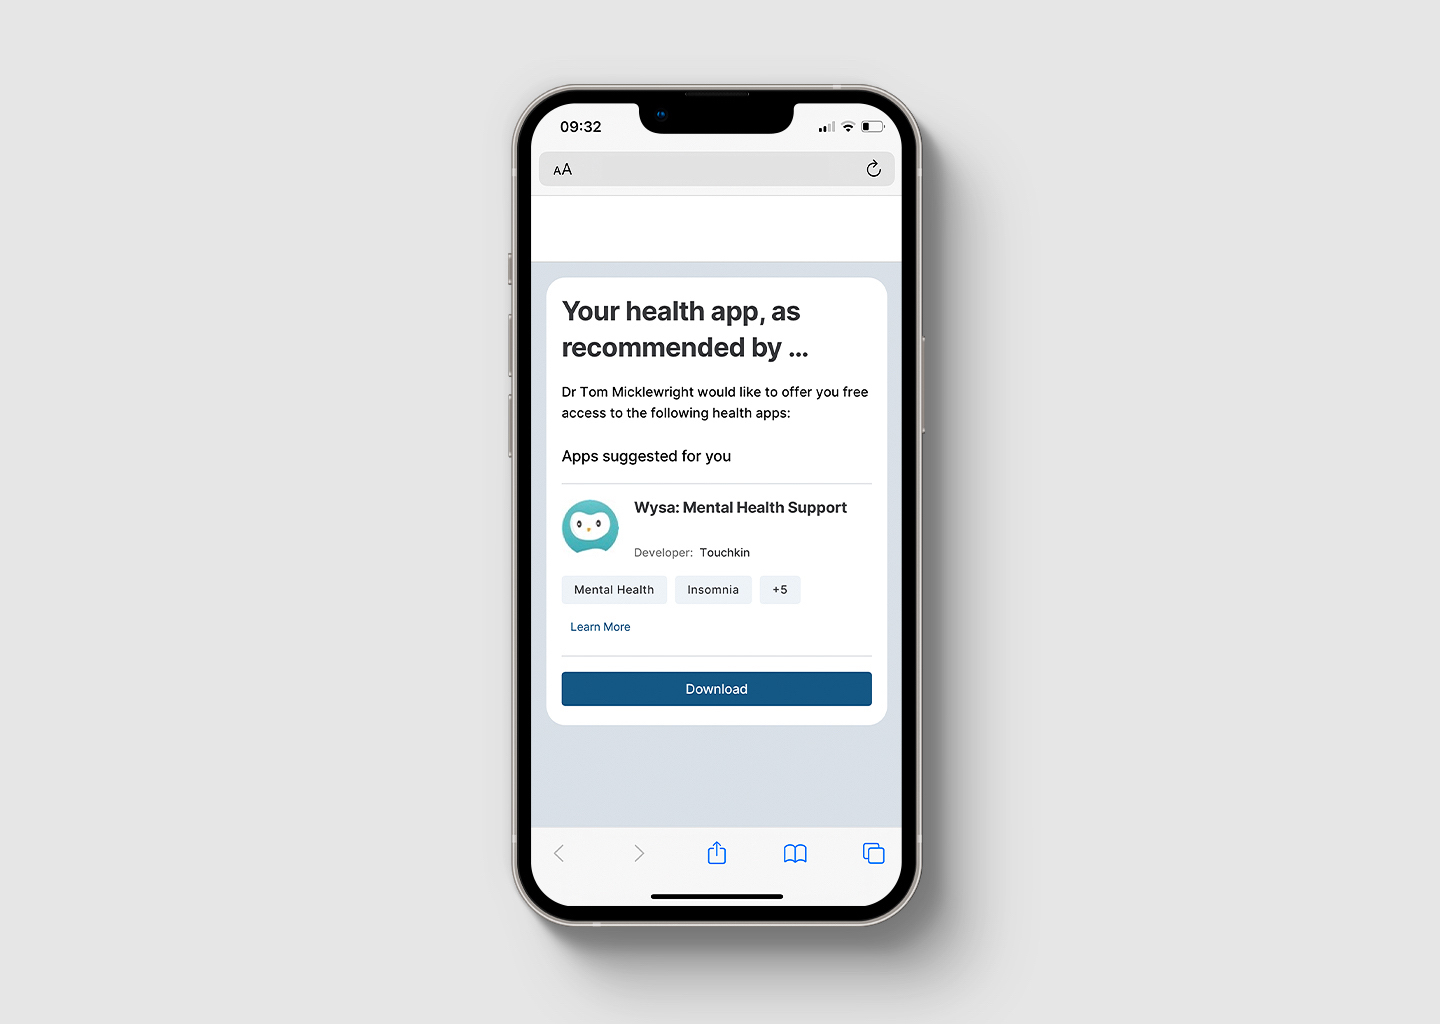 Health app recommendation from ORCHA digital health formulary, shown on a smartphone